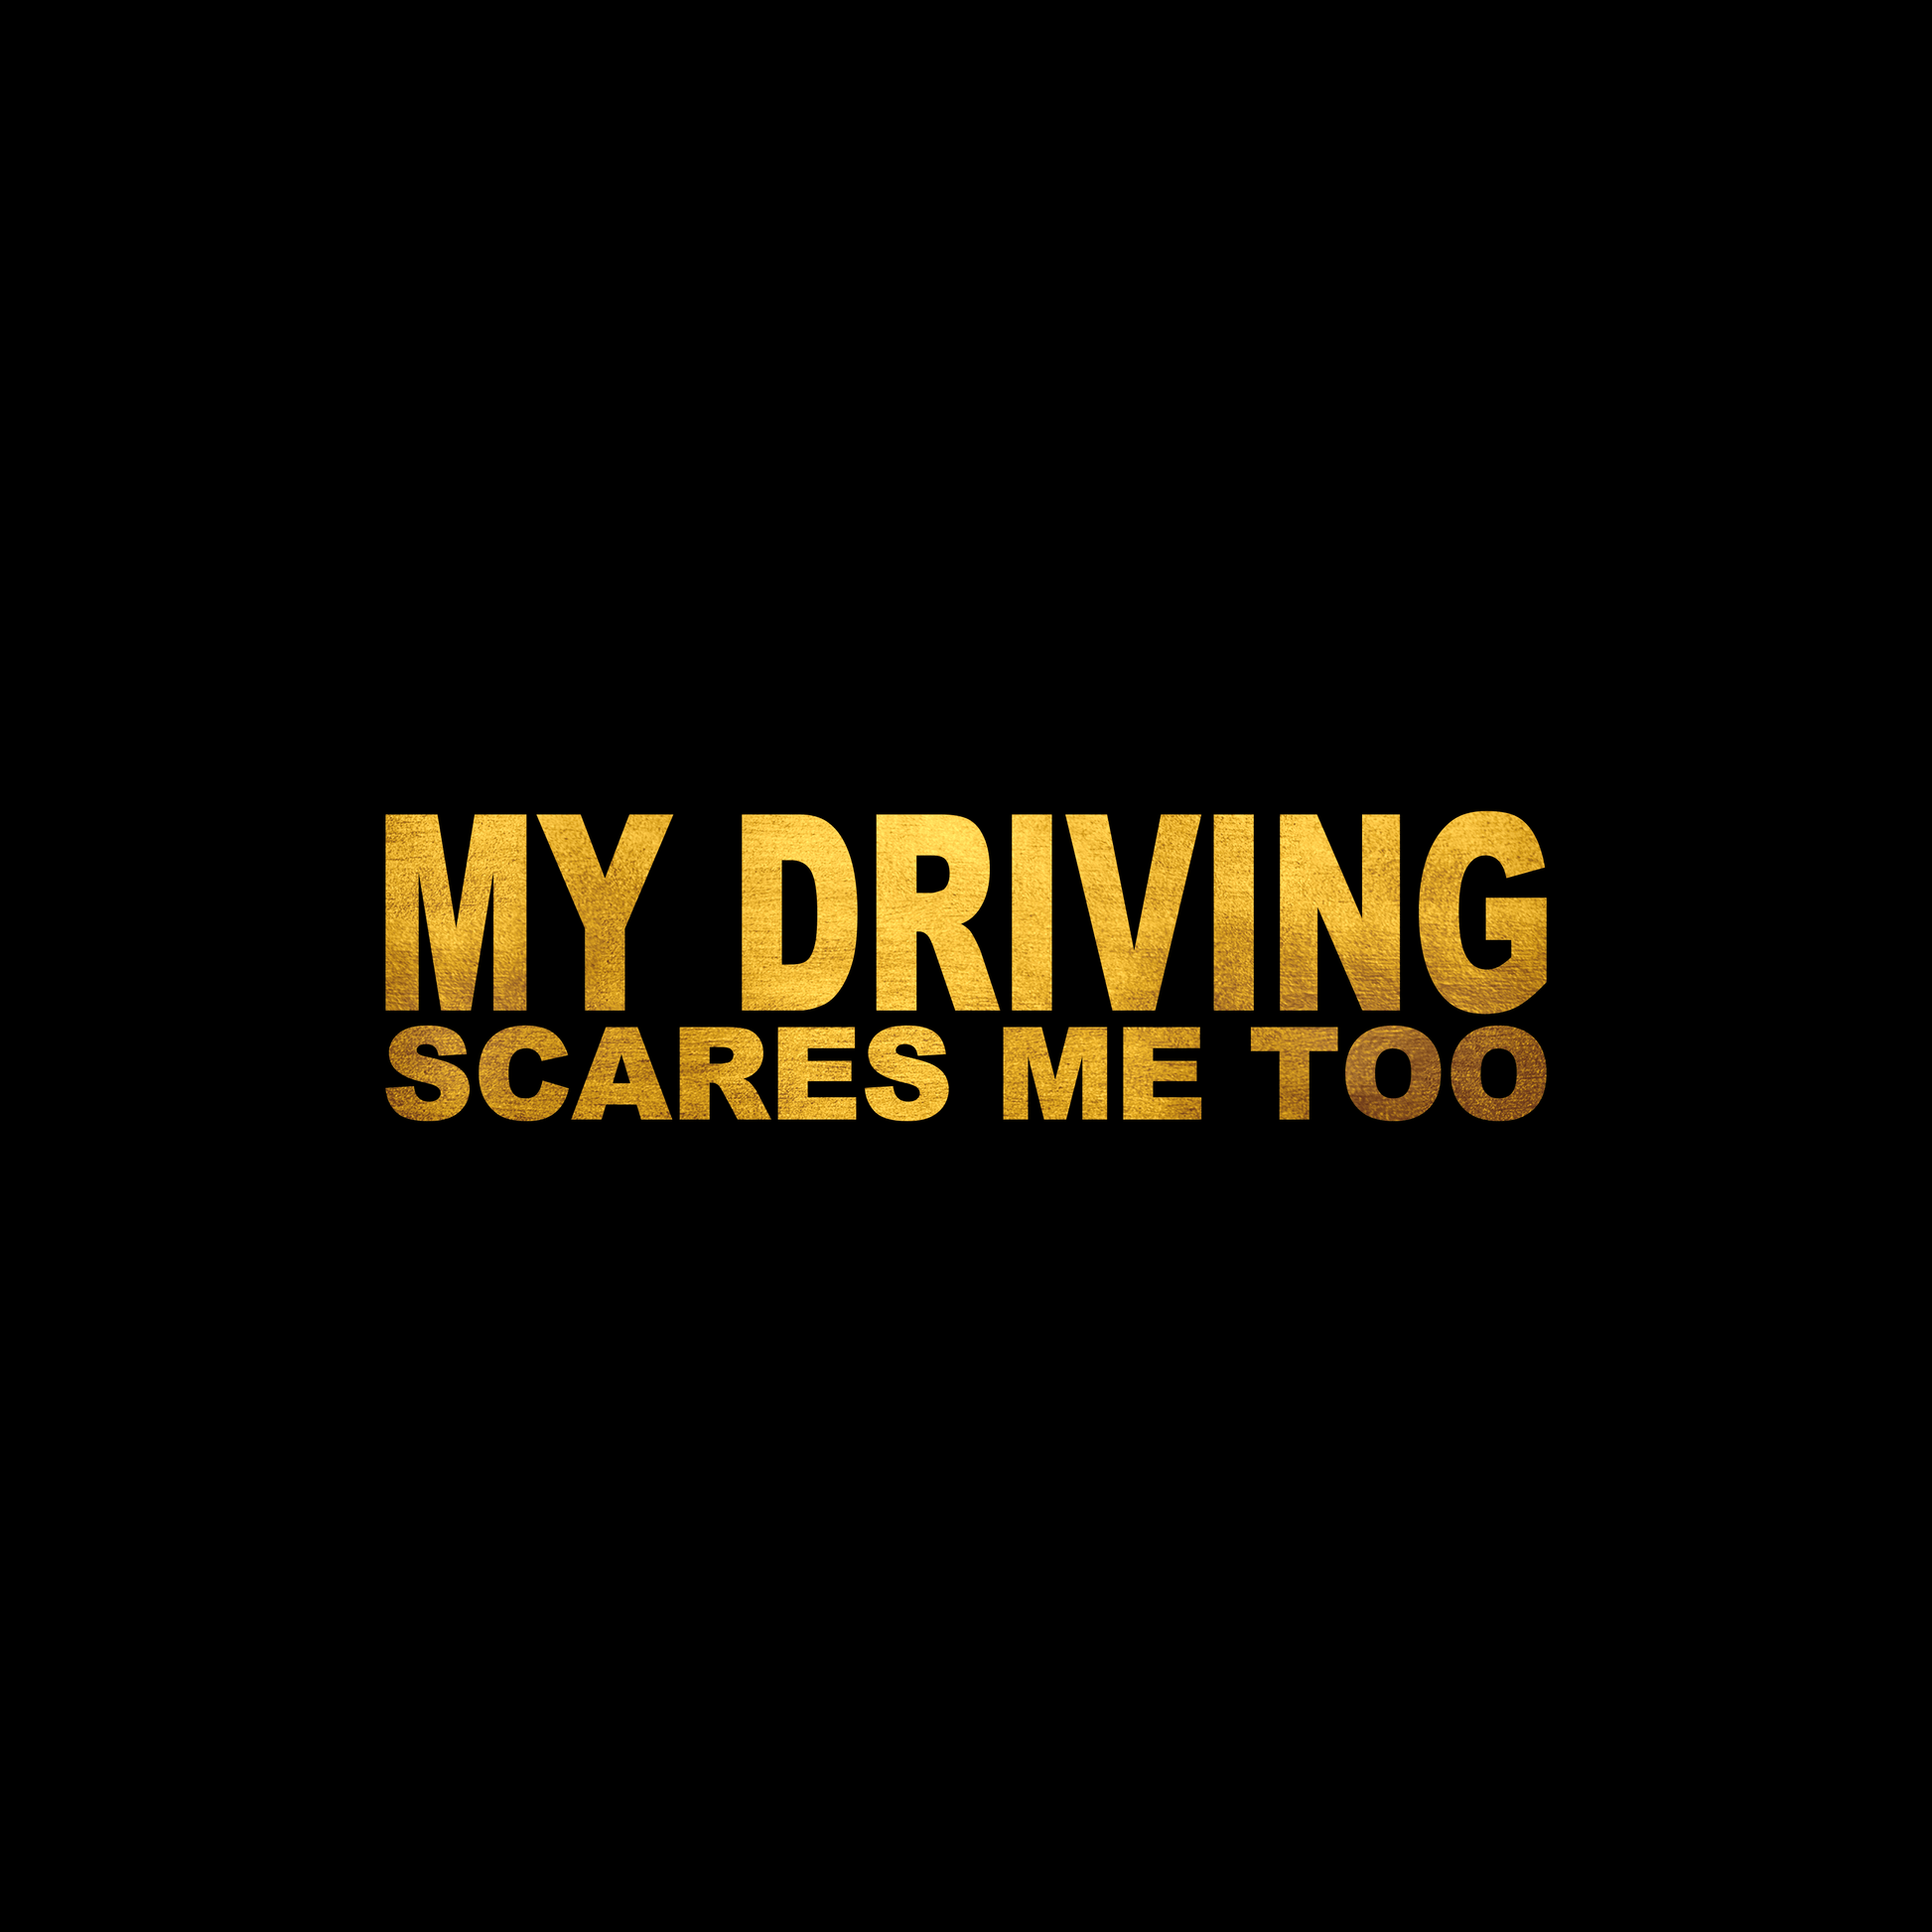 My driving scares me too sticker decal